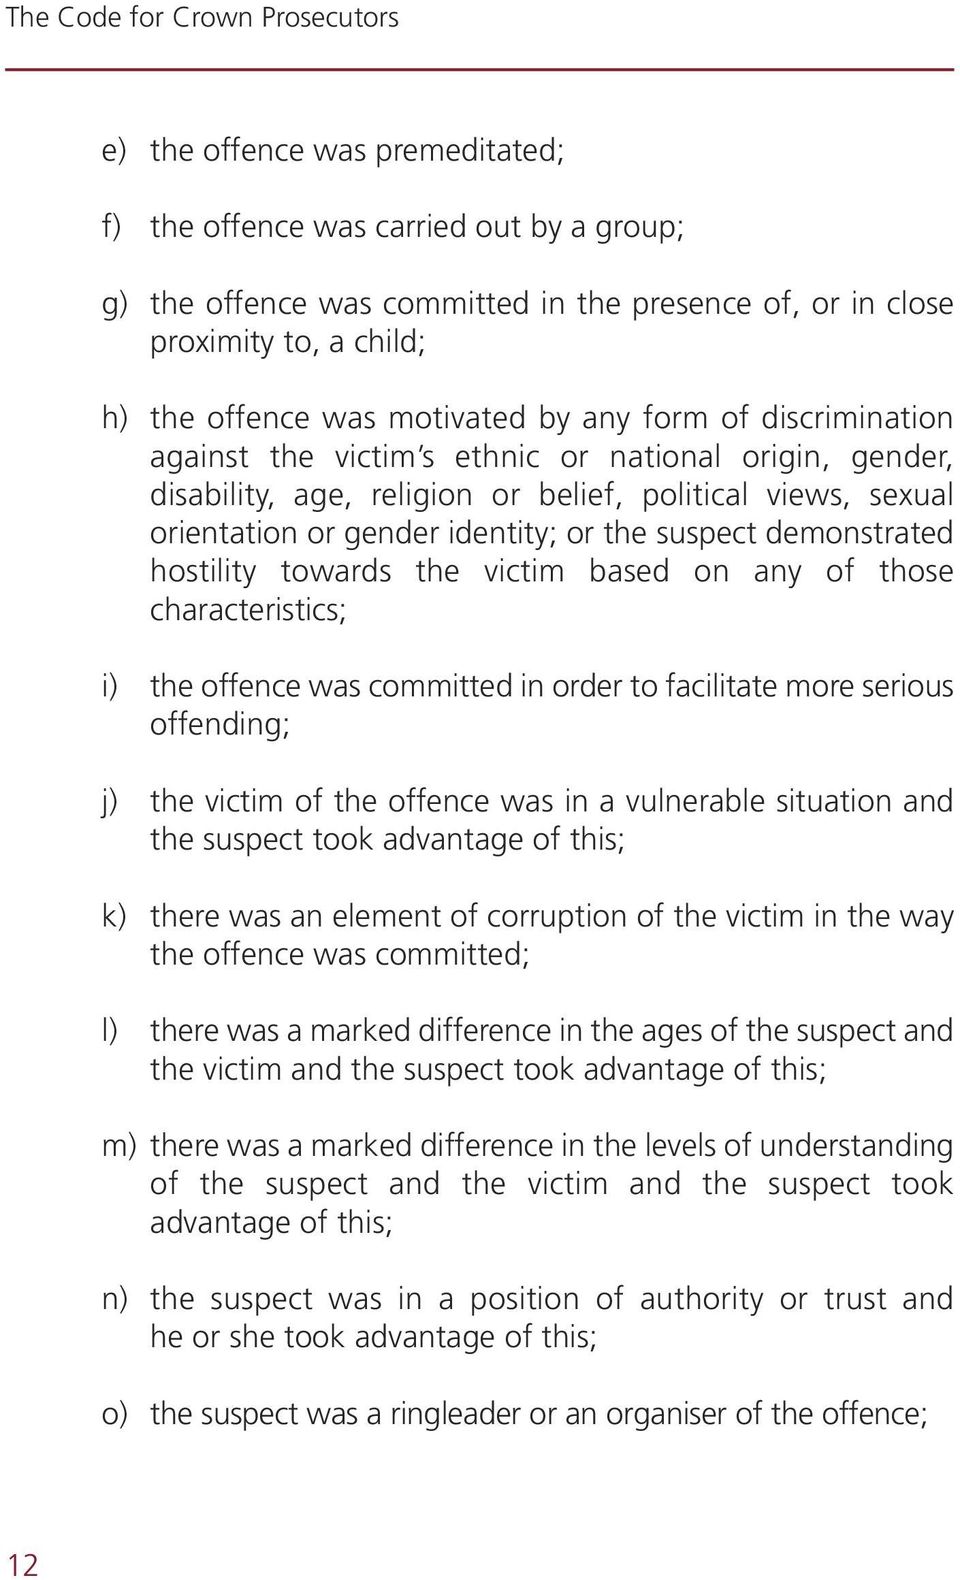 hostility towards the victim based on any of those characteristics; i) the offence was committed in order to facilitate more serious offending; j) the victim of the offence was in a vulnerable